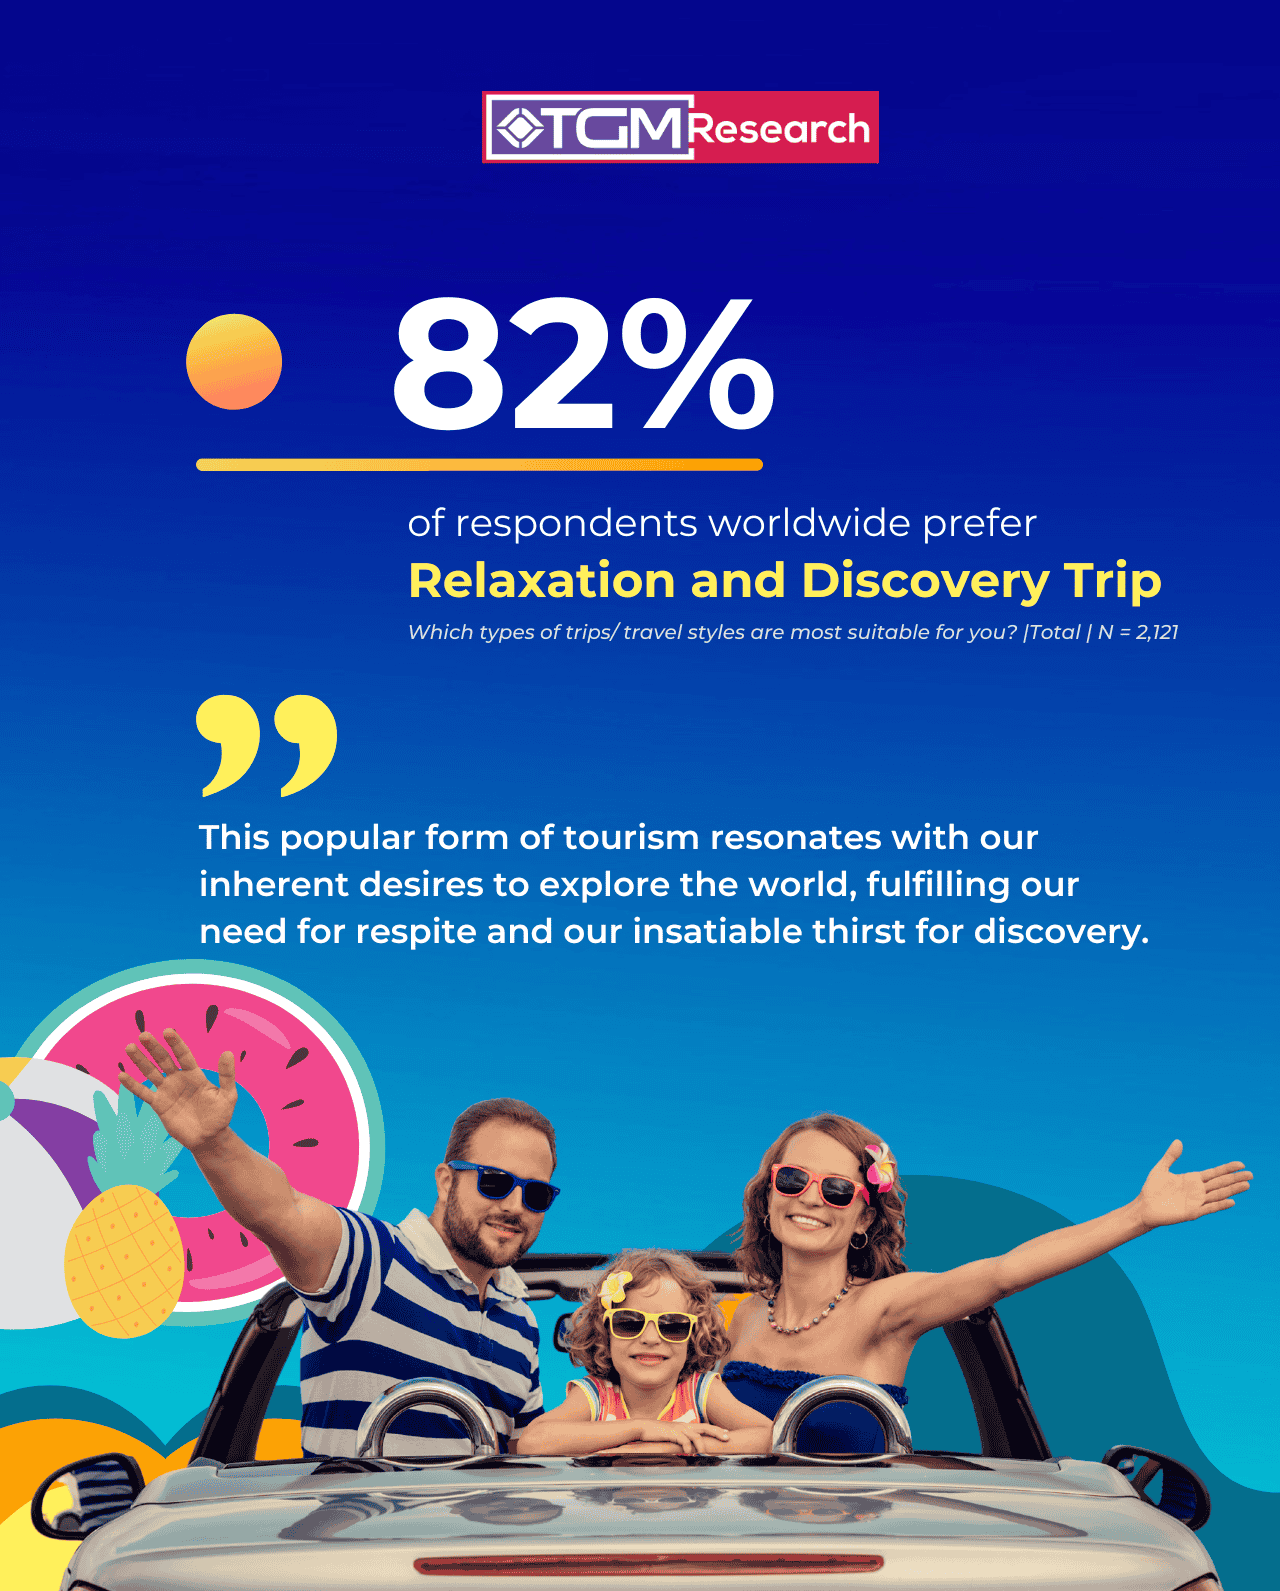 82% of respondents worldwide prefer Relaxation and Discovery trips